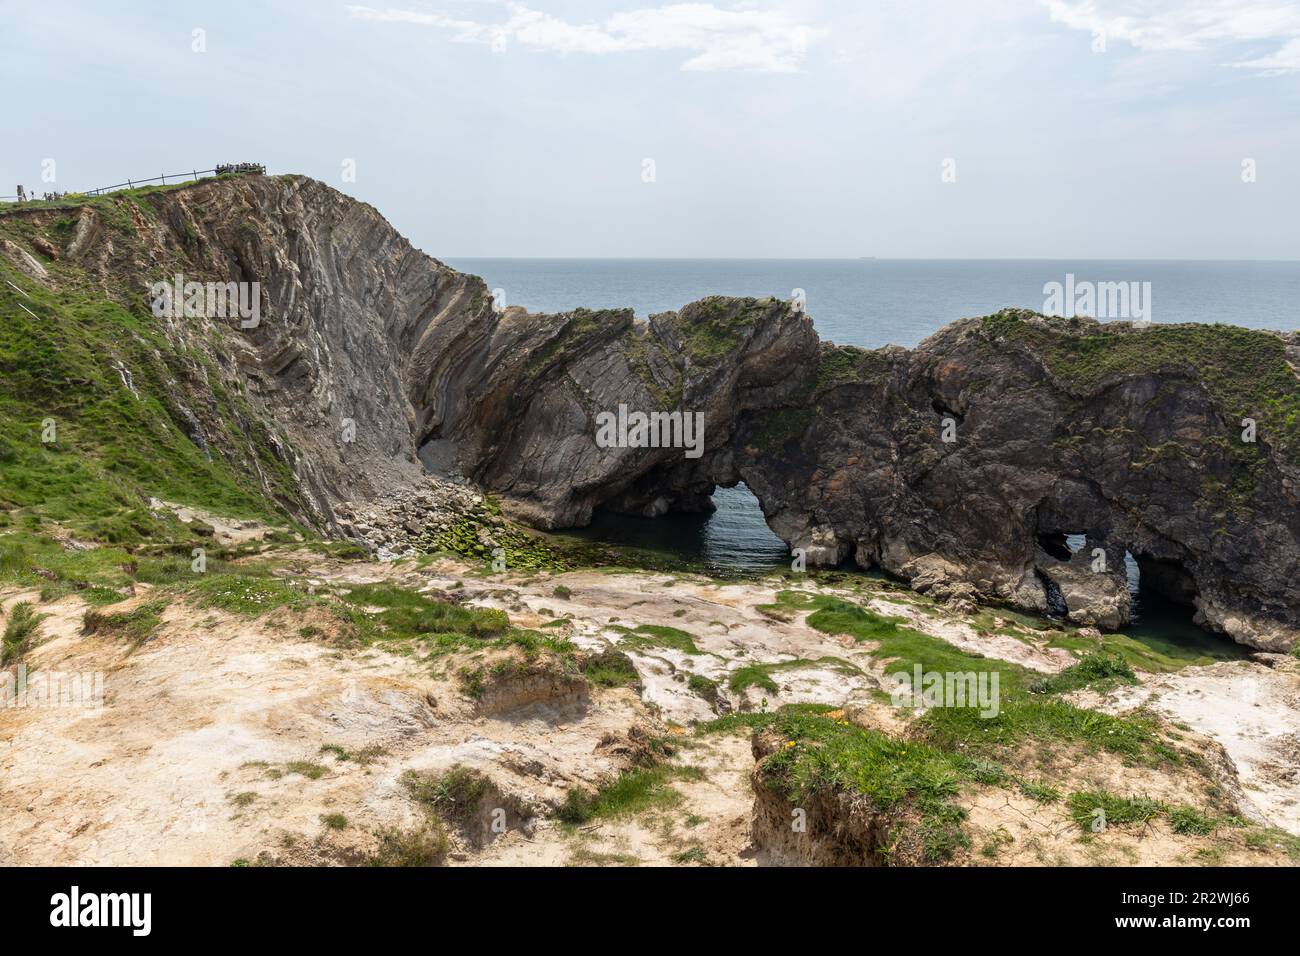 Stair Hole is a small cove at Lulworth Cove where folded limestone strata - the Lulworth crumple can be seen. UNESCO World Heritage Site, Dorset, UK Stock Photo